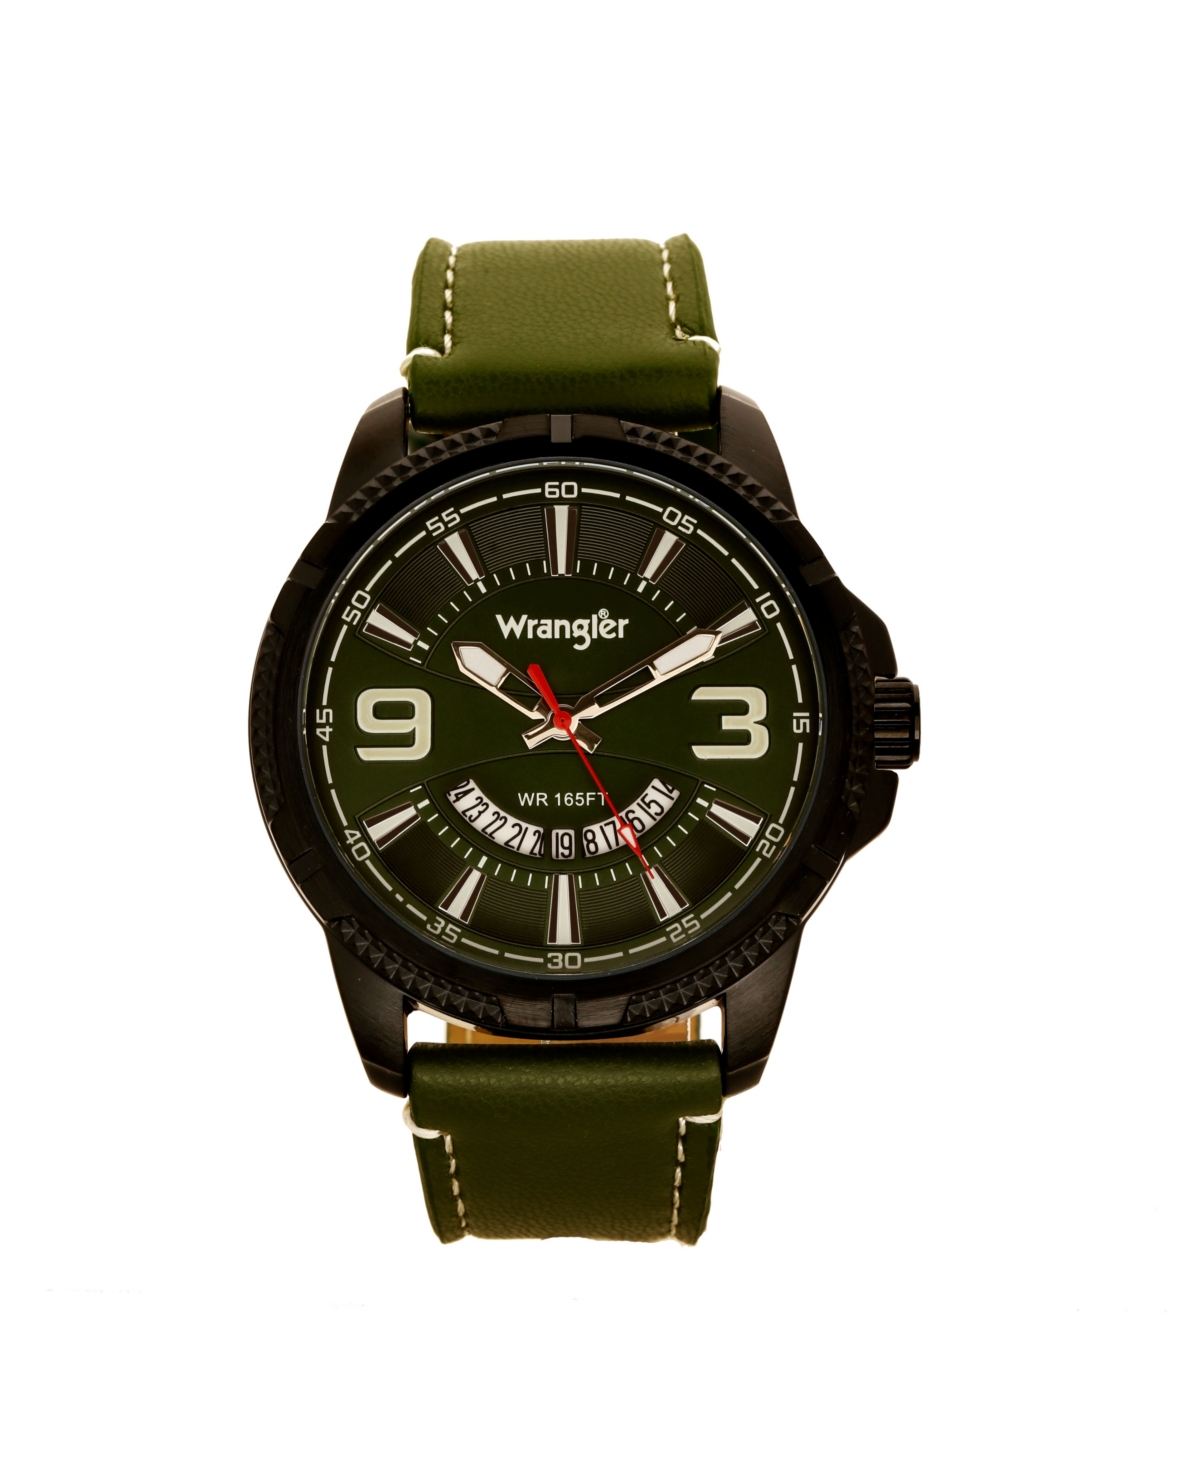 Men's Watch, 48MM Black Ridged Case with Green Zoned Dial, Outer Zone is Milled with White Index Markers, Outer Ring Has is Marked with White